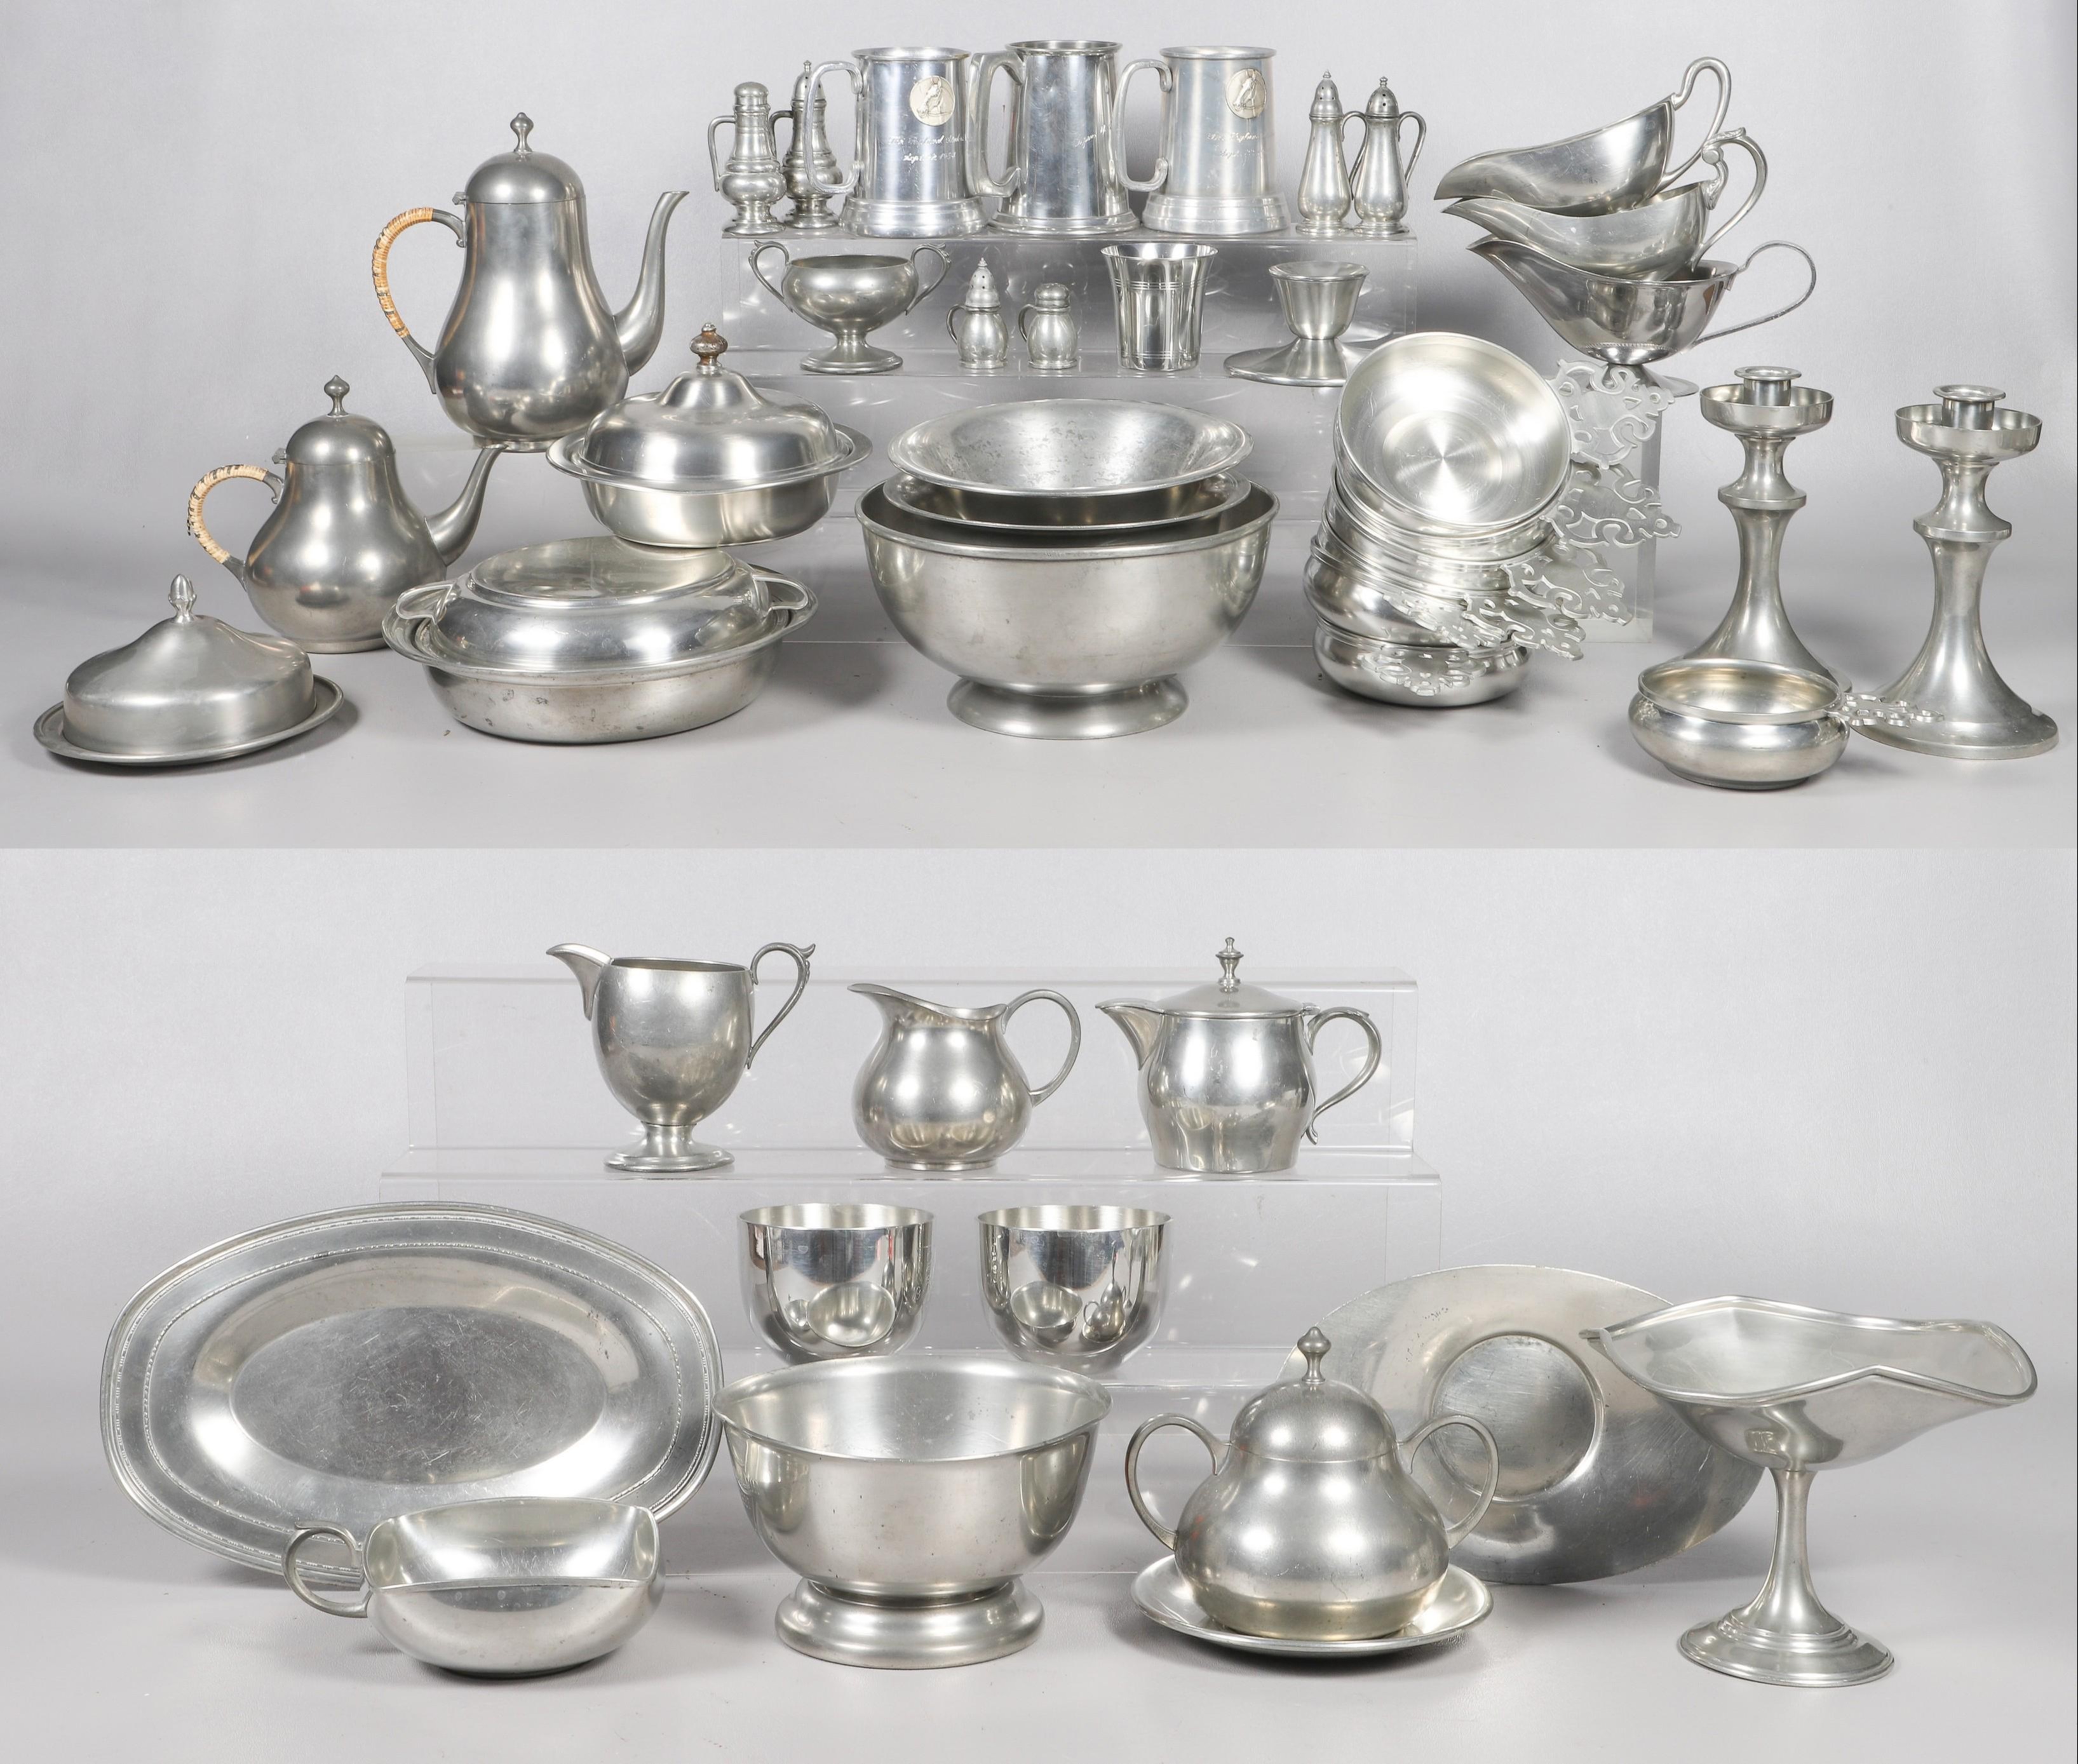 Oversized pewter table item grouping